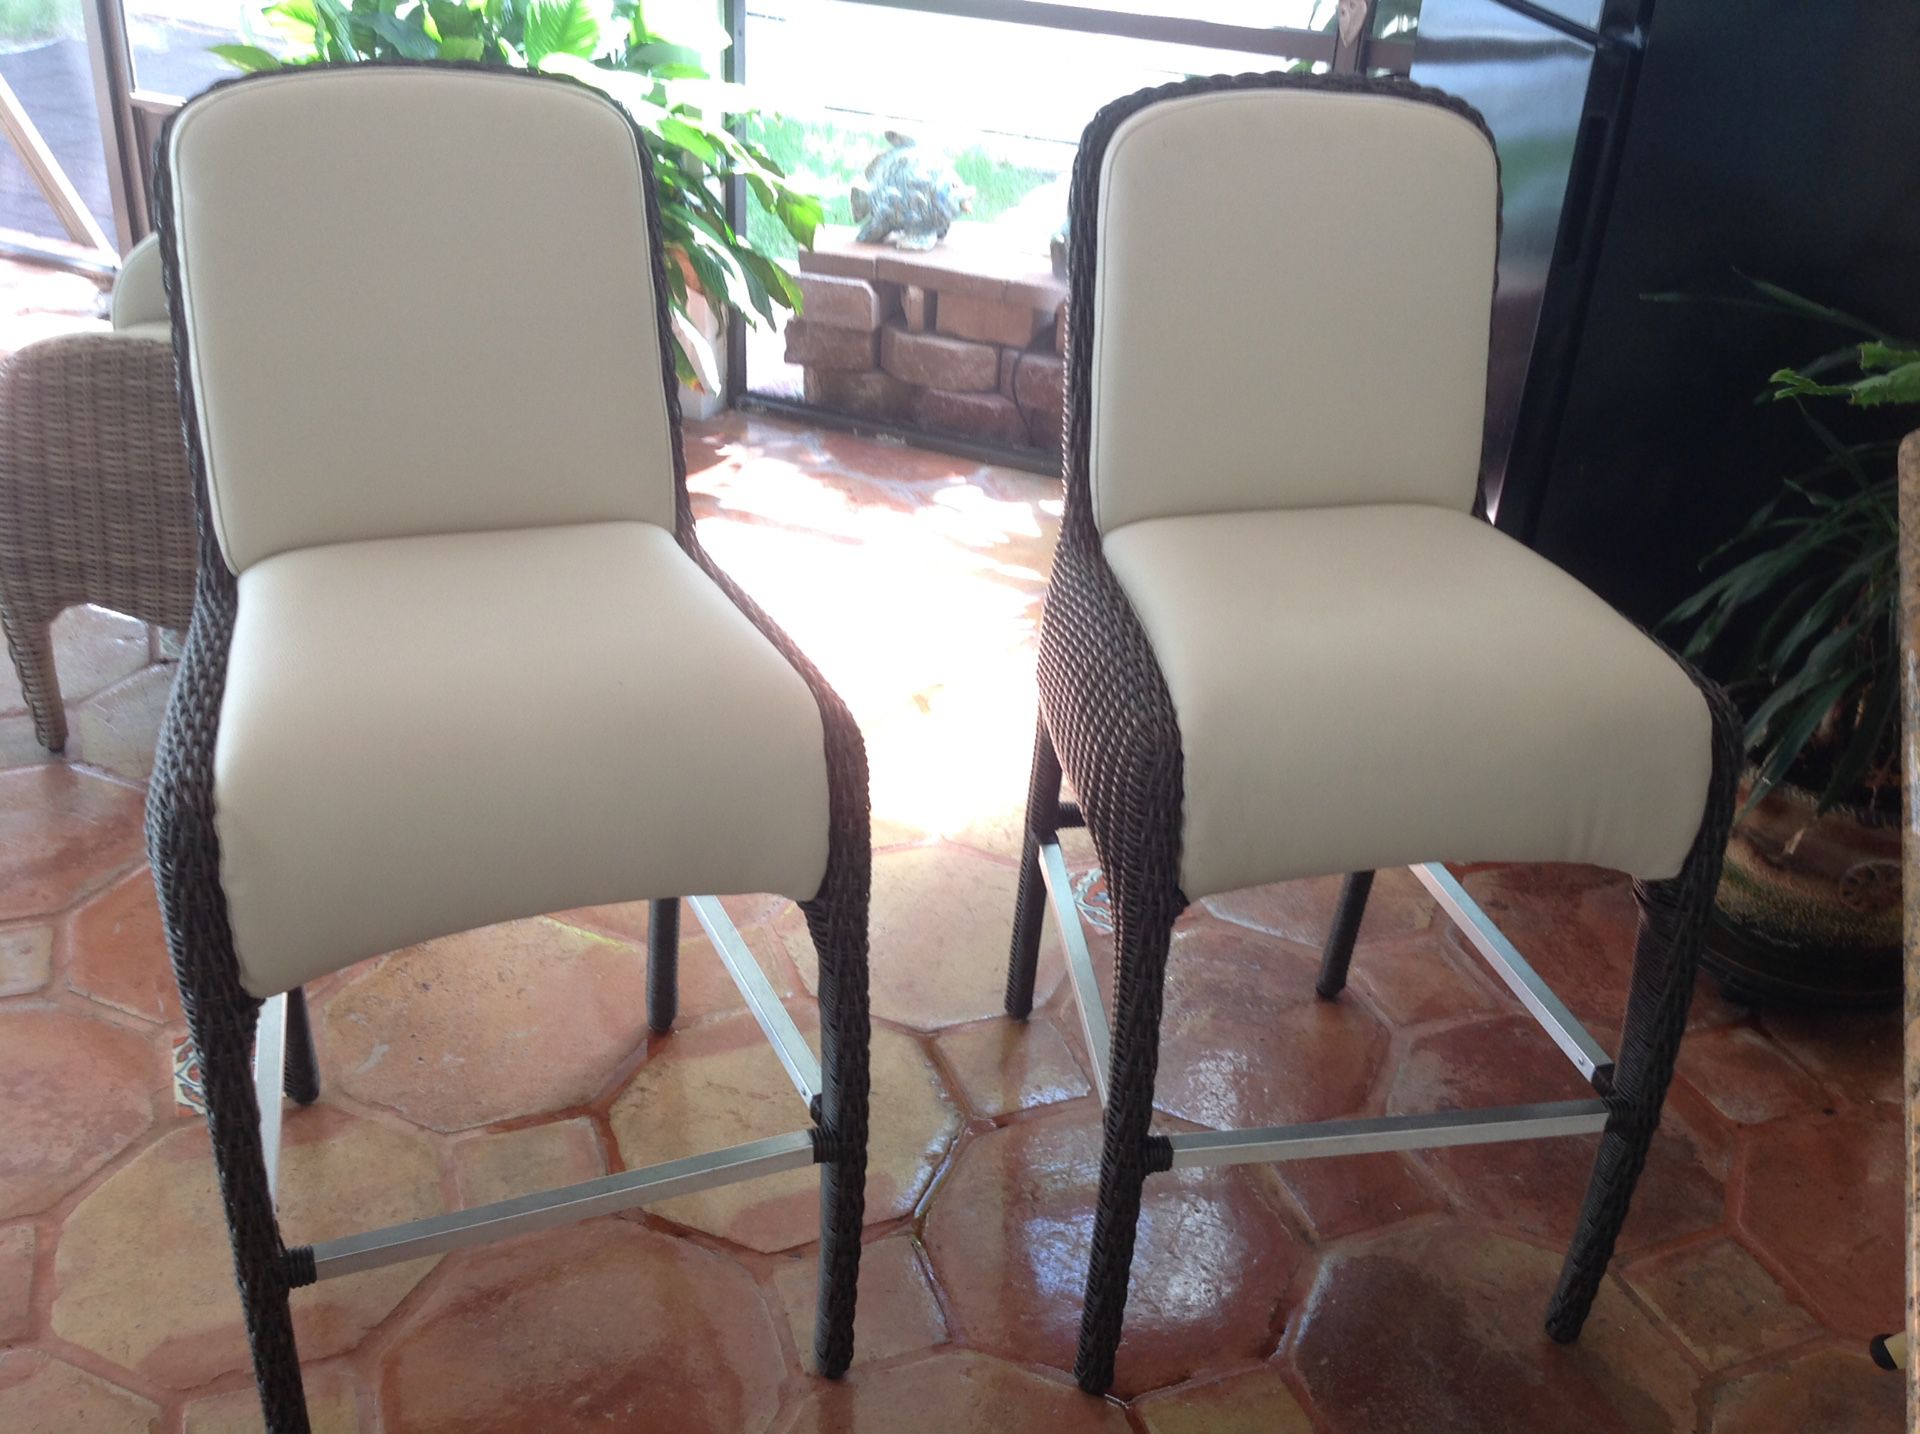 Bar Stools - Selling both Purchased from El Dorado (Excellent Condition!).